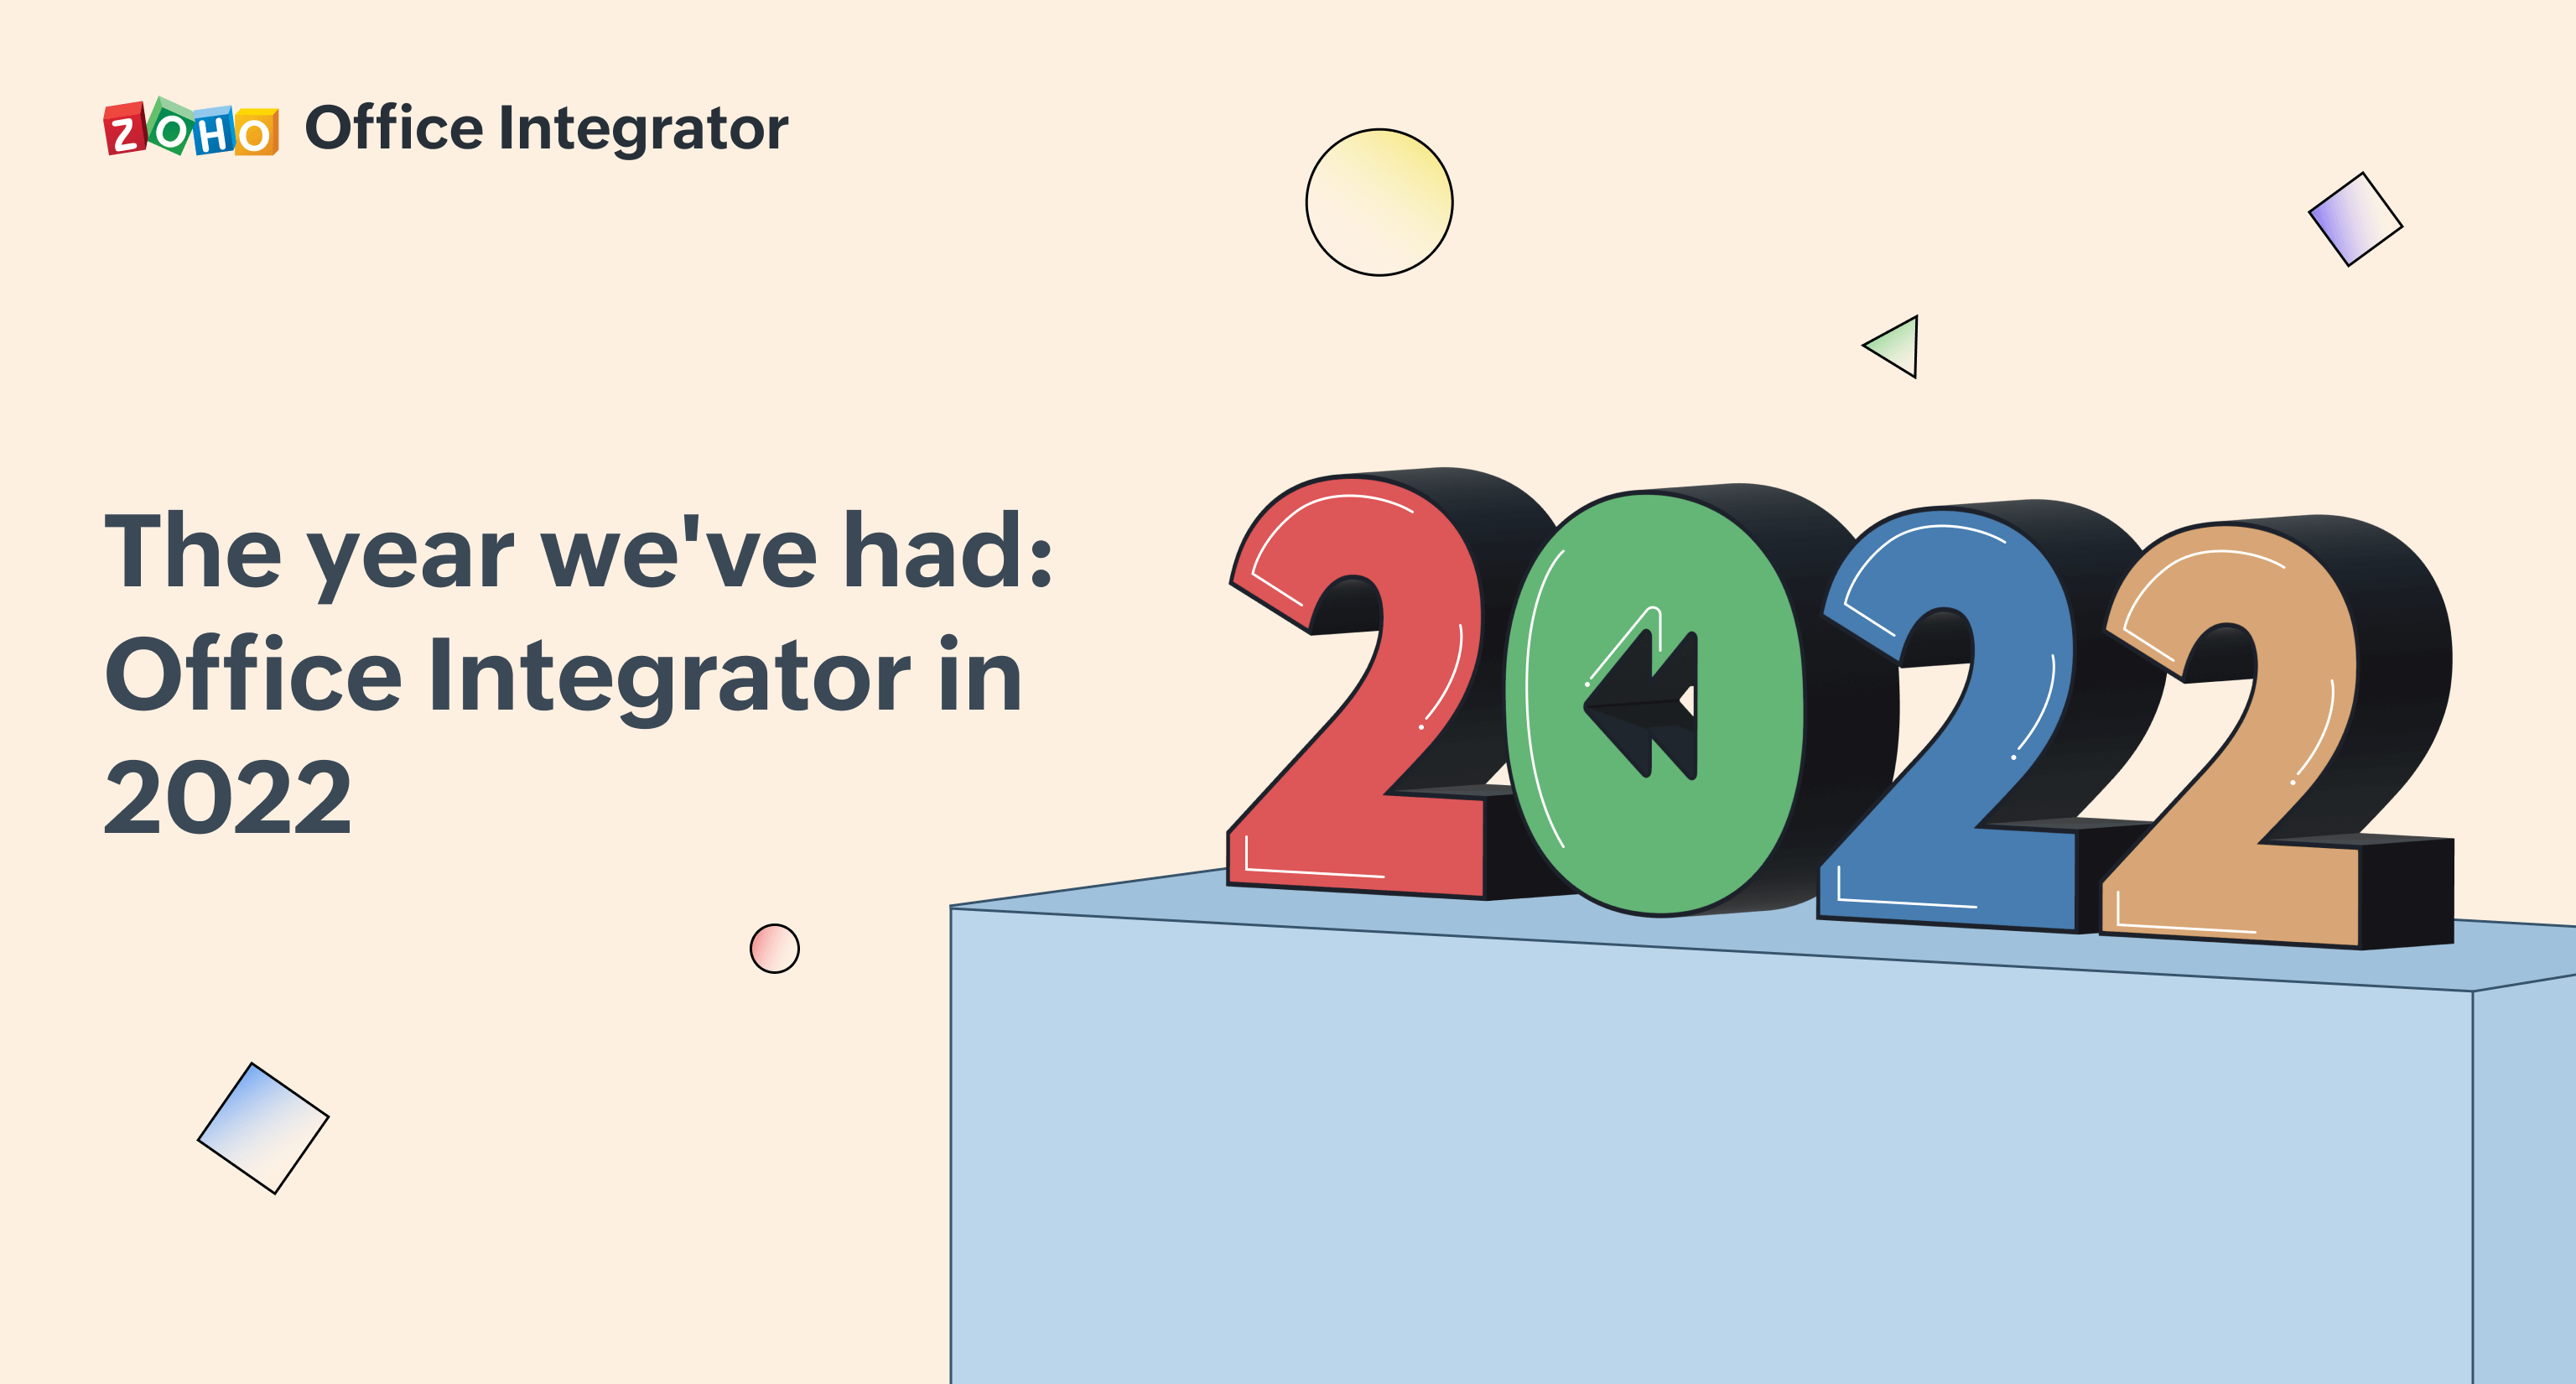 The year we've had: Office Integrator in 2022